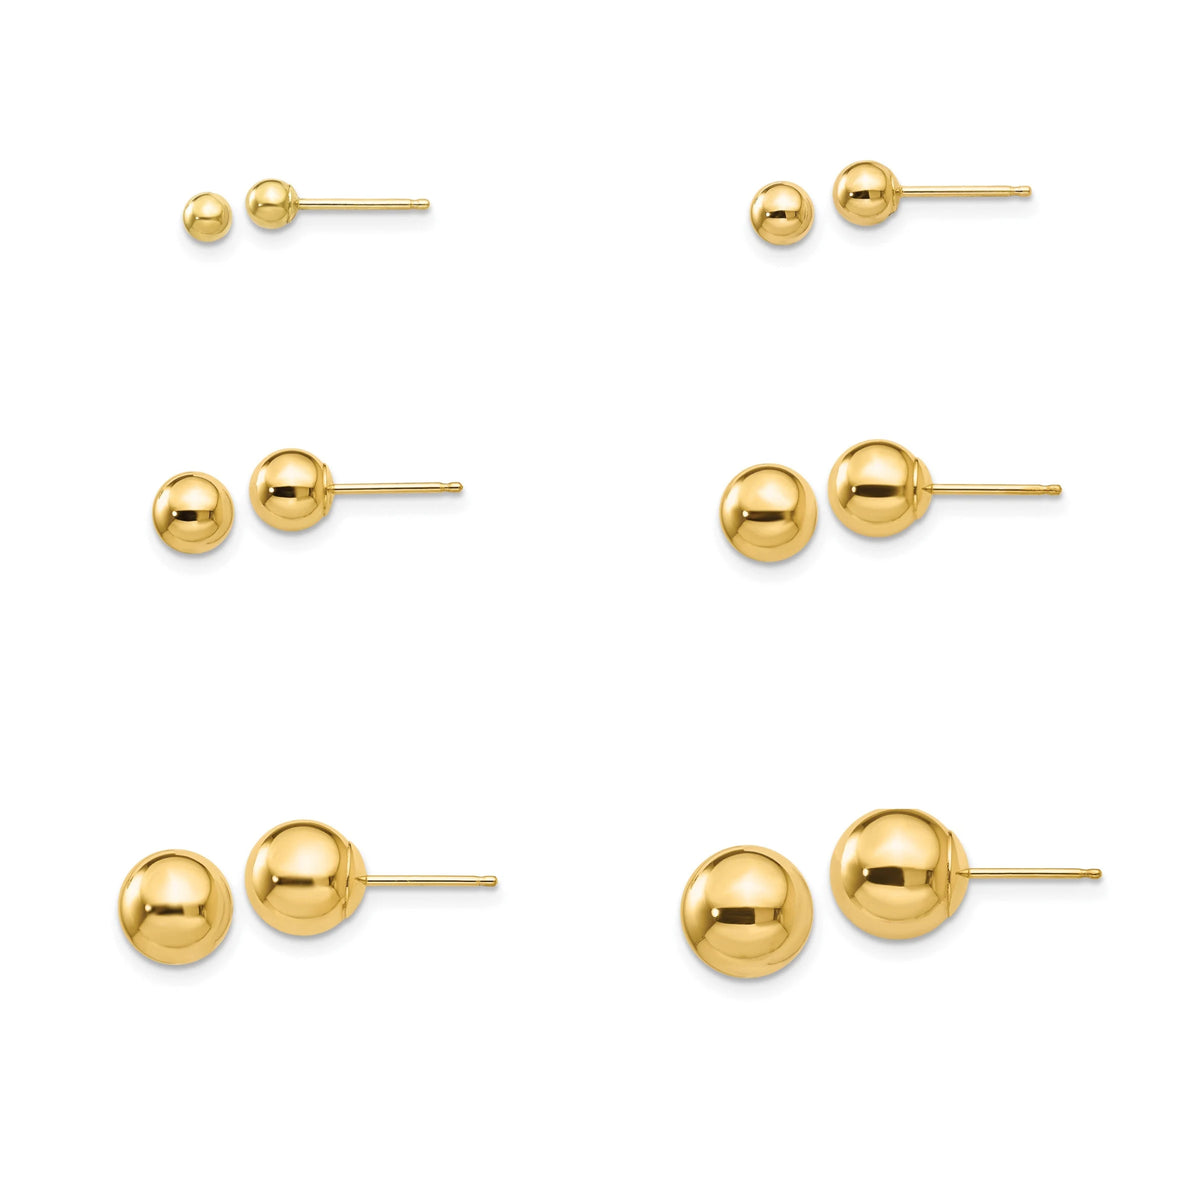 10k Yellow Gold Ball Post Earrings Genuine 10k Yellow Gold (Not Plated or Filled) Made in USA - Gift Box Included